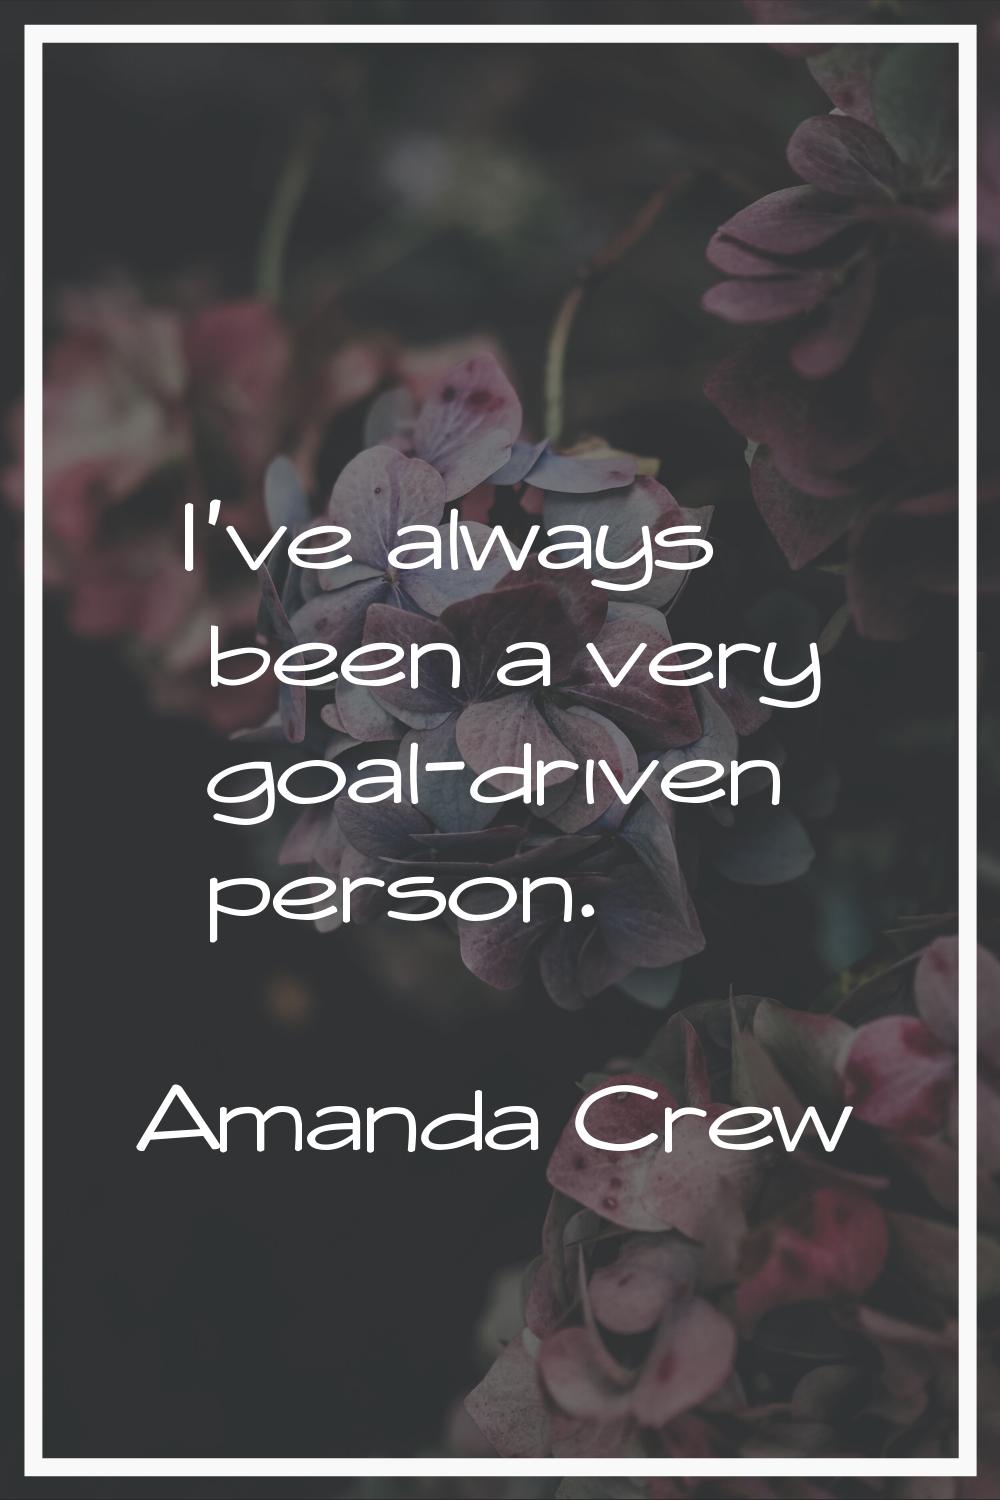 I've always been a very goal-driven person.